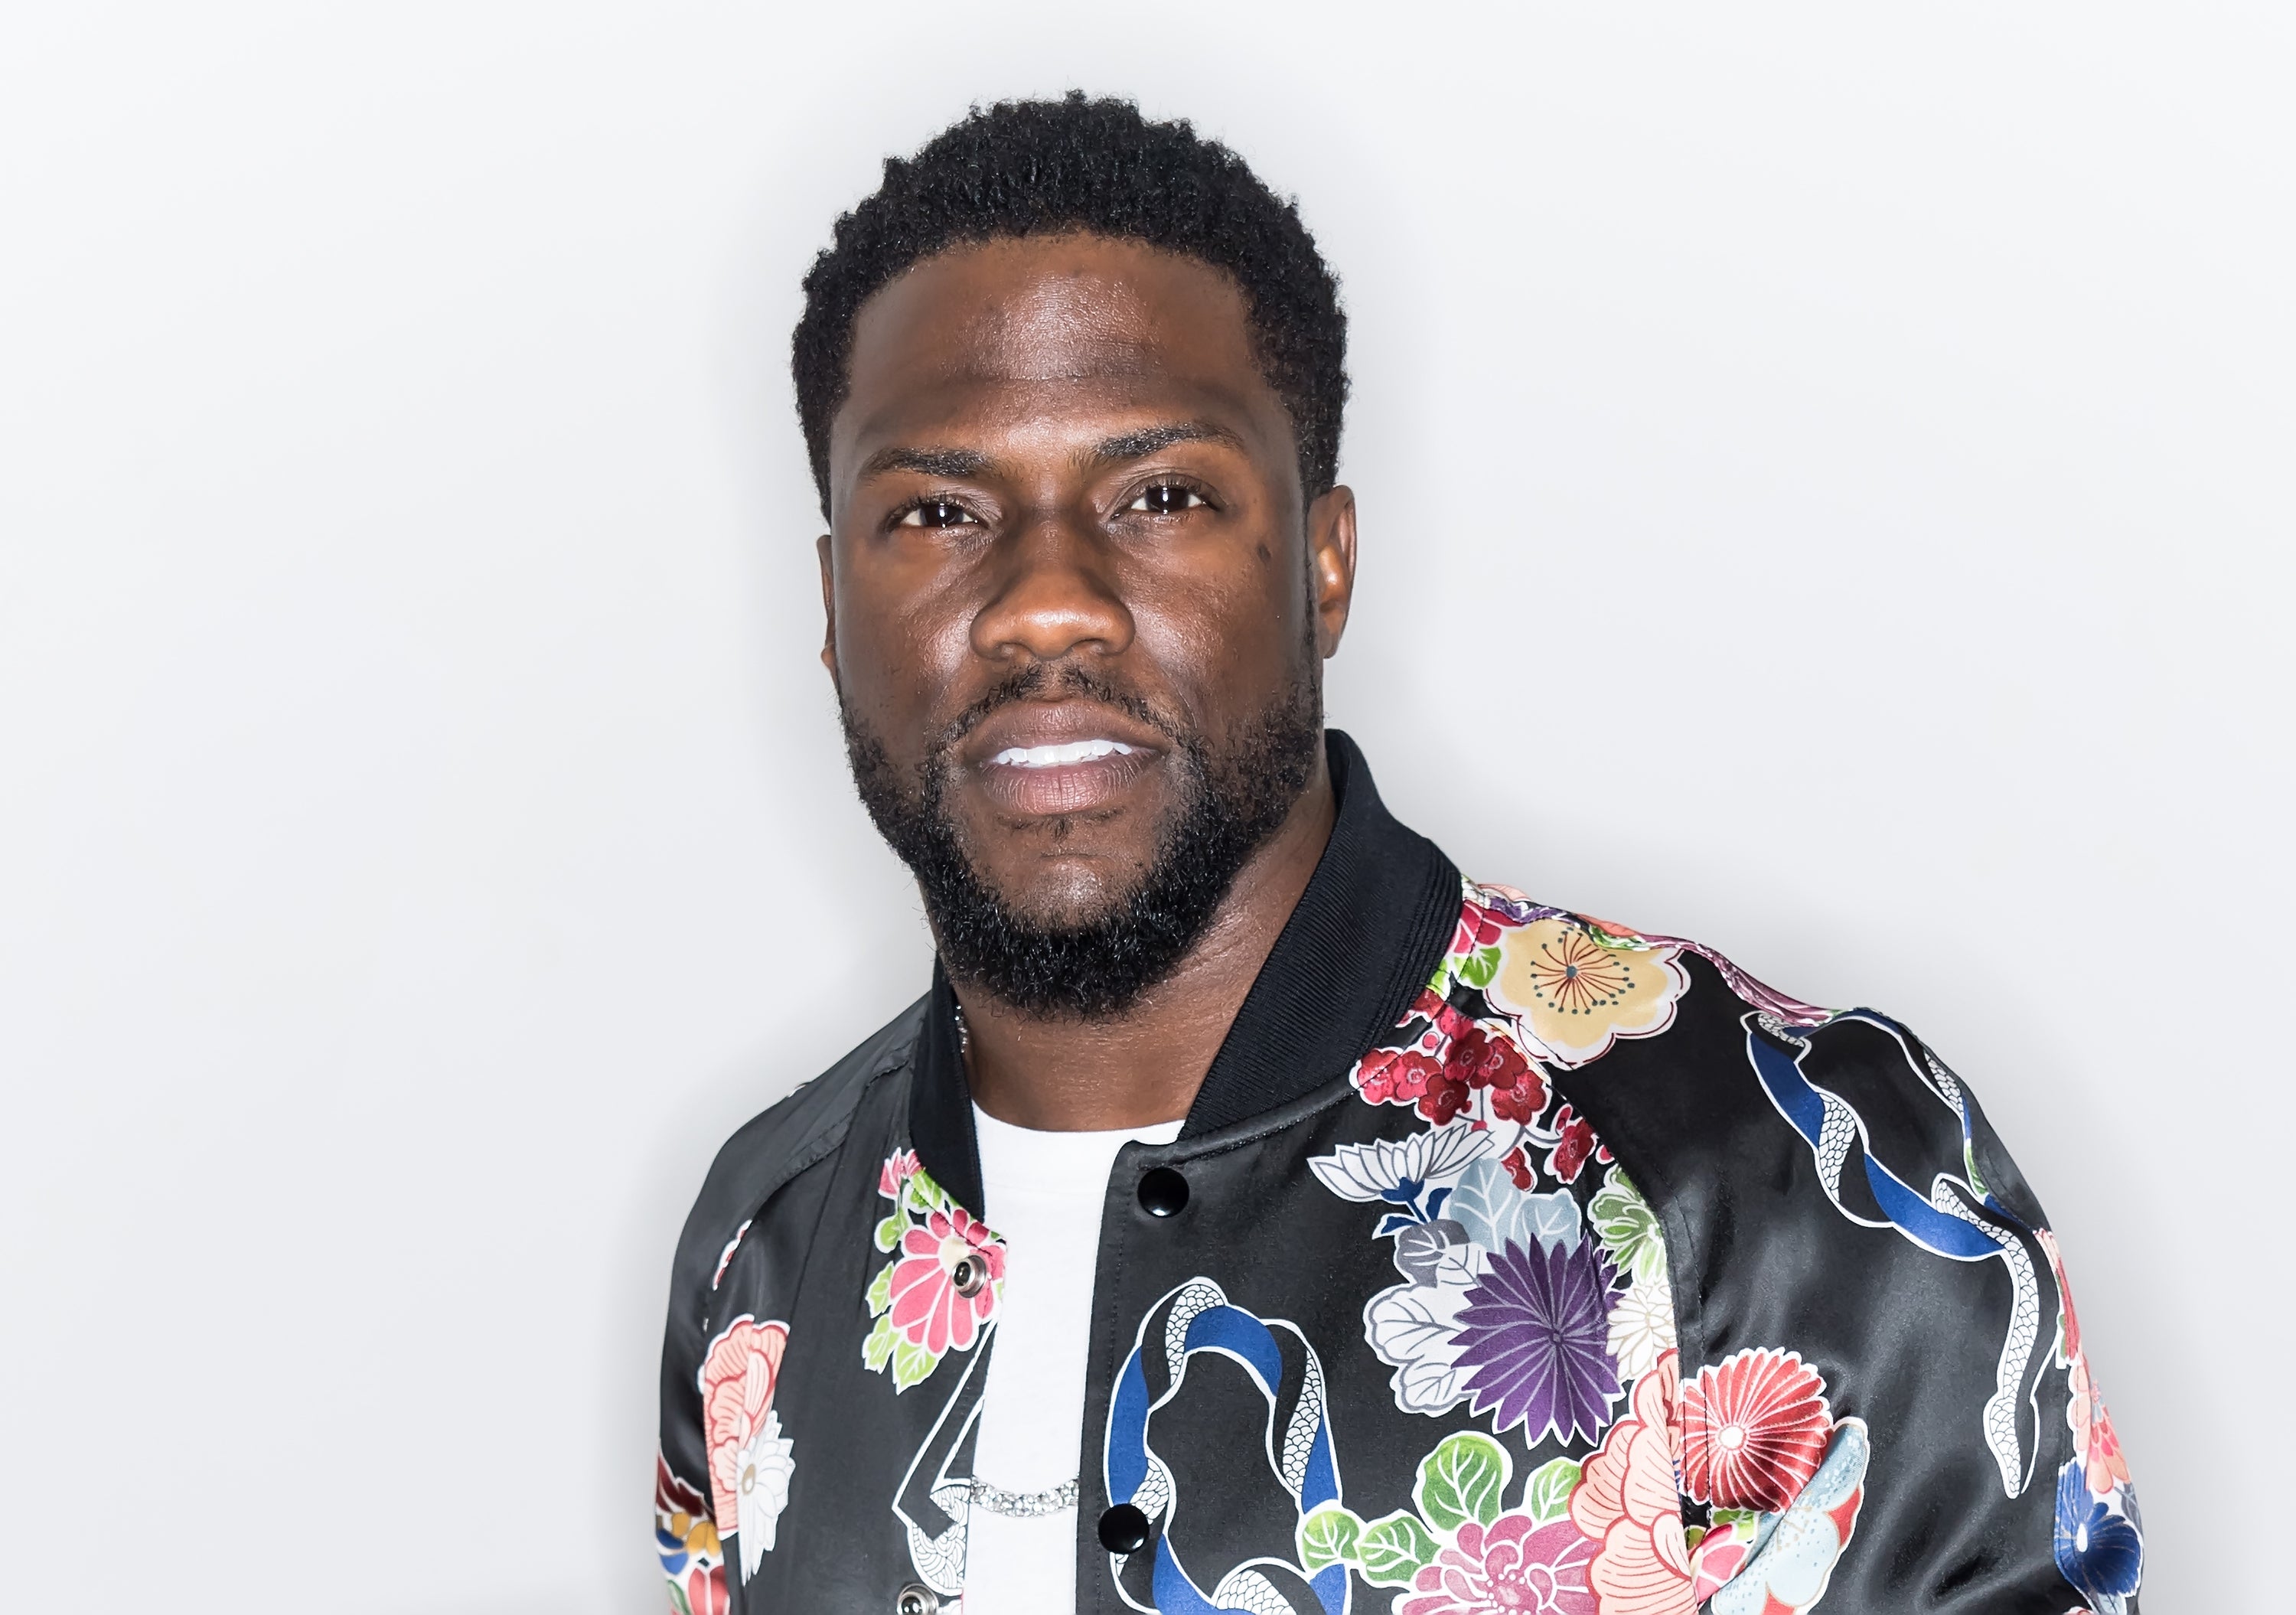 New Dad Kevin Hart Reveals He Didn’t Initially Want To Have A New Baby During SNL Monologue